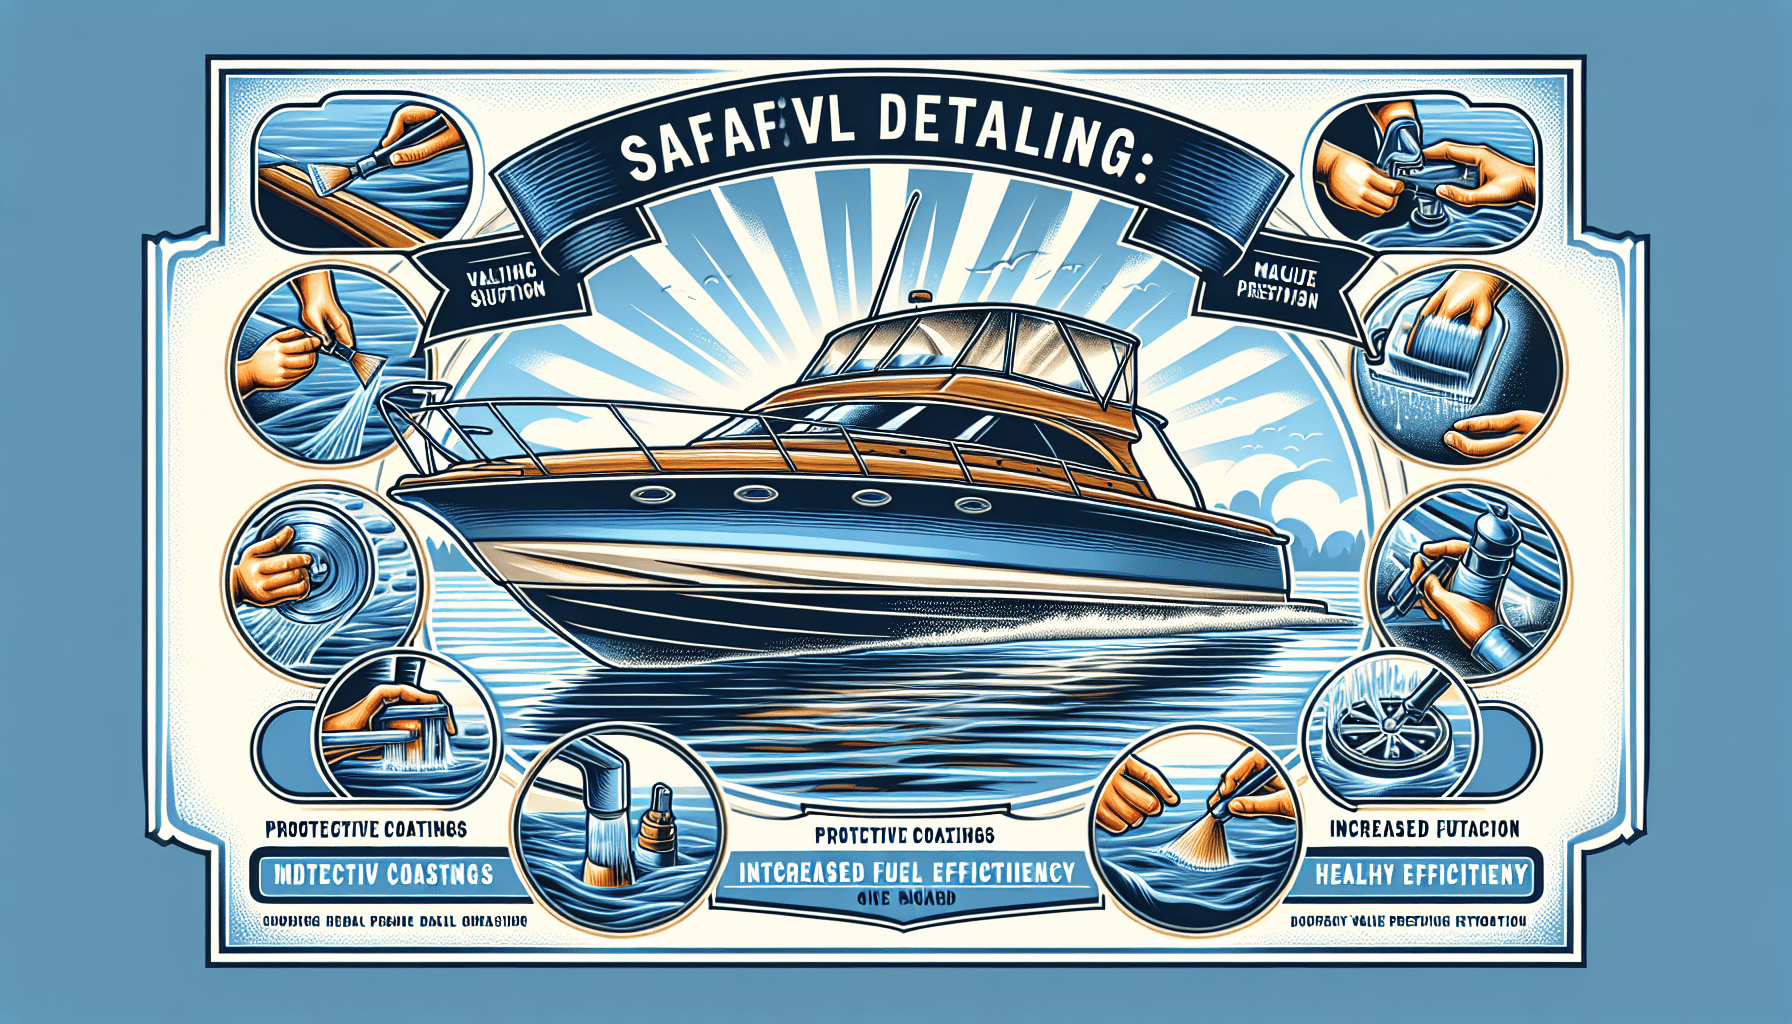 what are the top 5 benefits of boat detailing for maintaining your vessels value